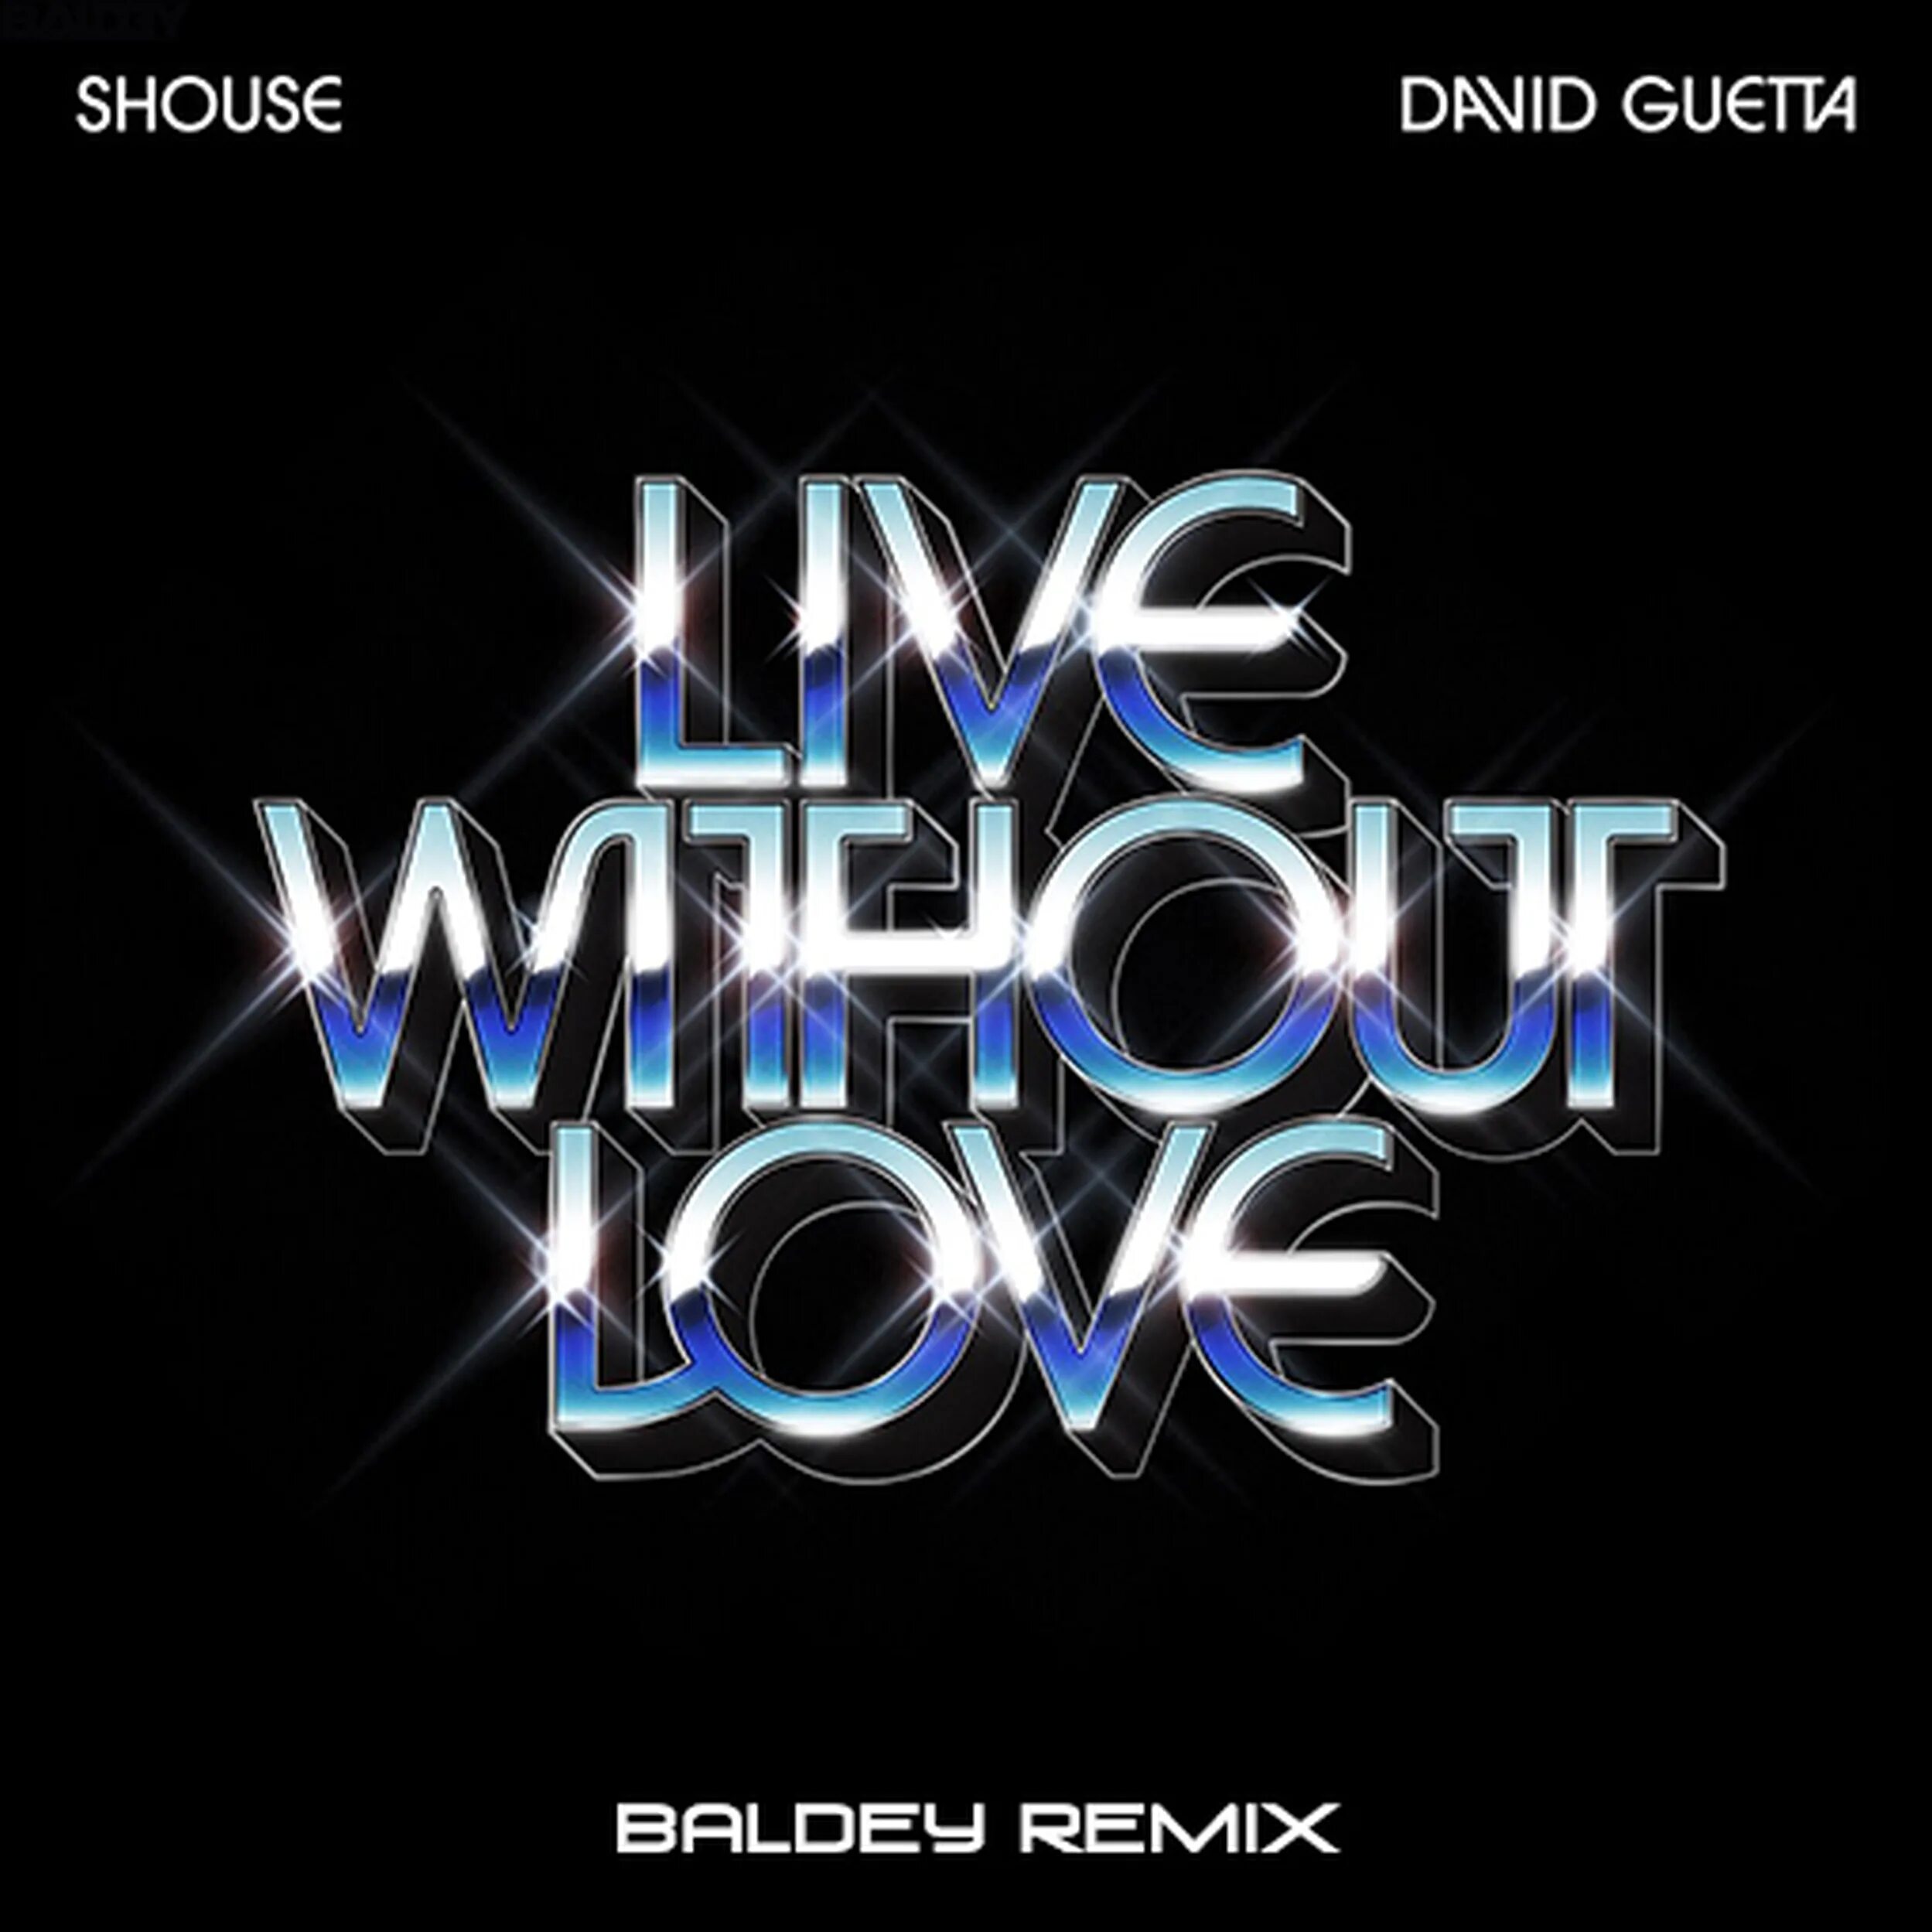 Shouse & David Guetta - Live without Love. Дэвид Гетта 2023. Shouse. Дэвид Гетта ремикс.